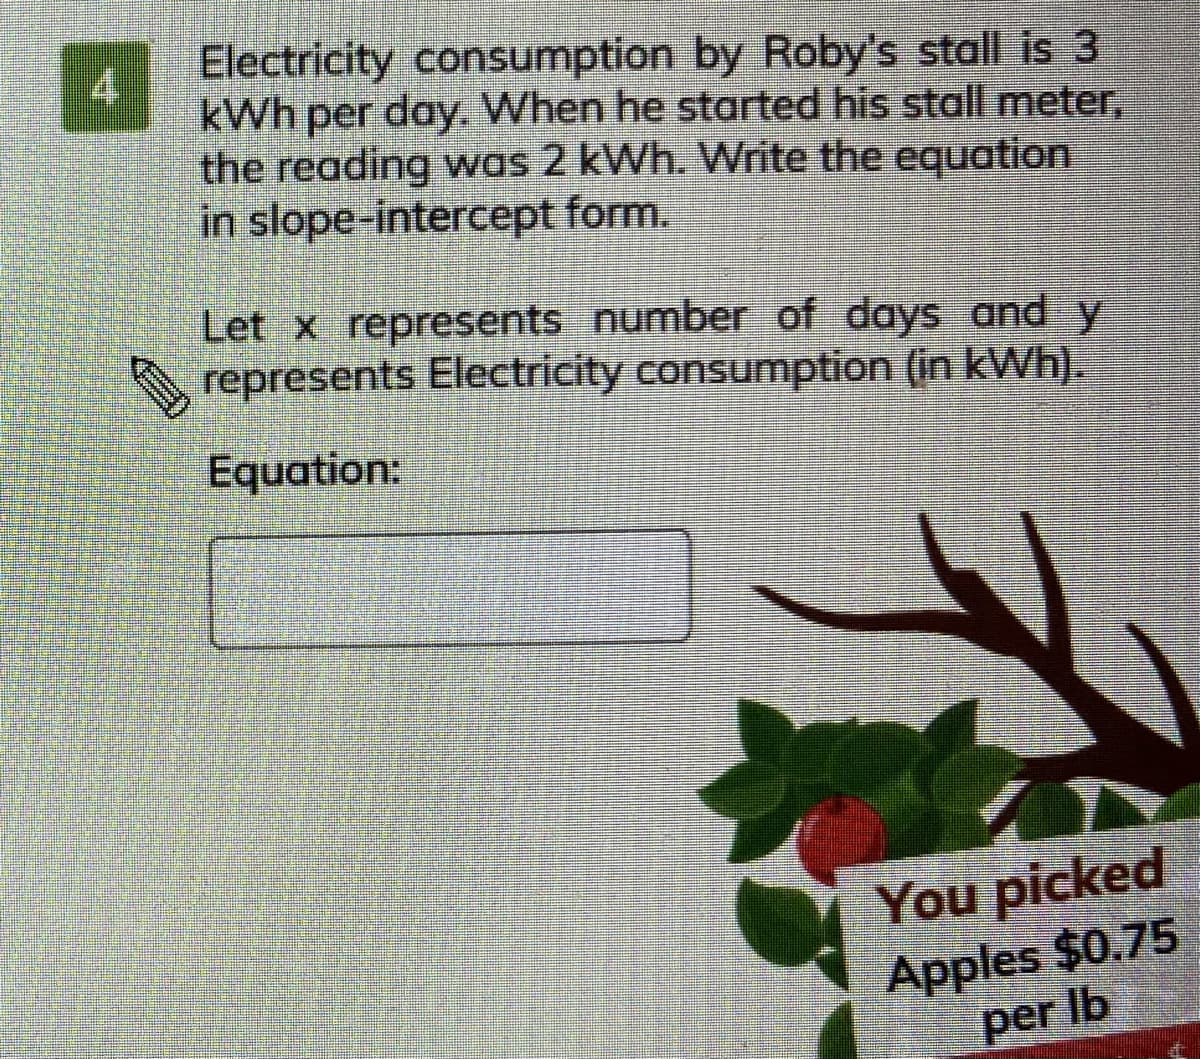 Electricity consumption by Roby's stall is 3
4
kWh per day. When he started his stall meter,
the reading was 2 kWh. Write the equation
in slope-intercept form.
Let x represents number of days and y
represents Electricity consumption (in kWh).
Equation:
You picked
Apples $0.75
per Ib
